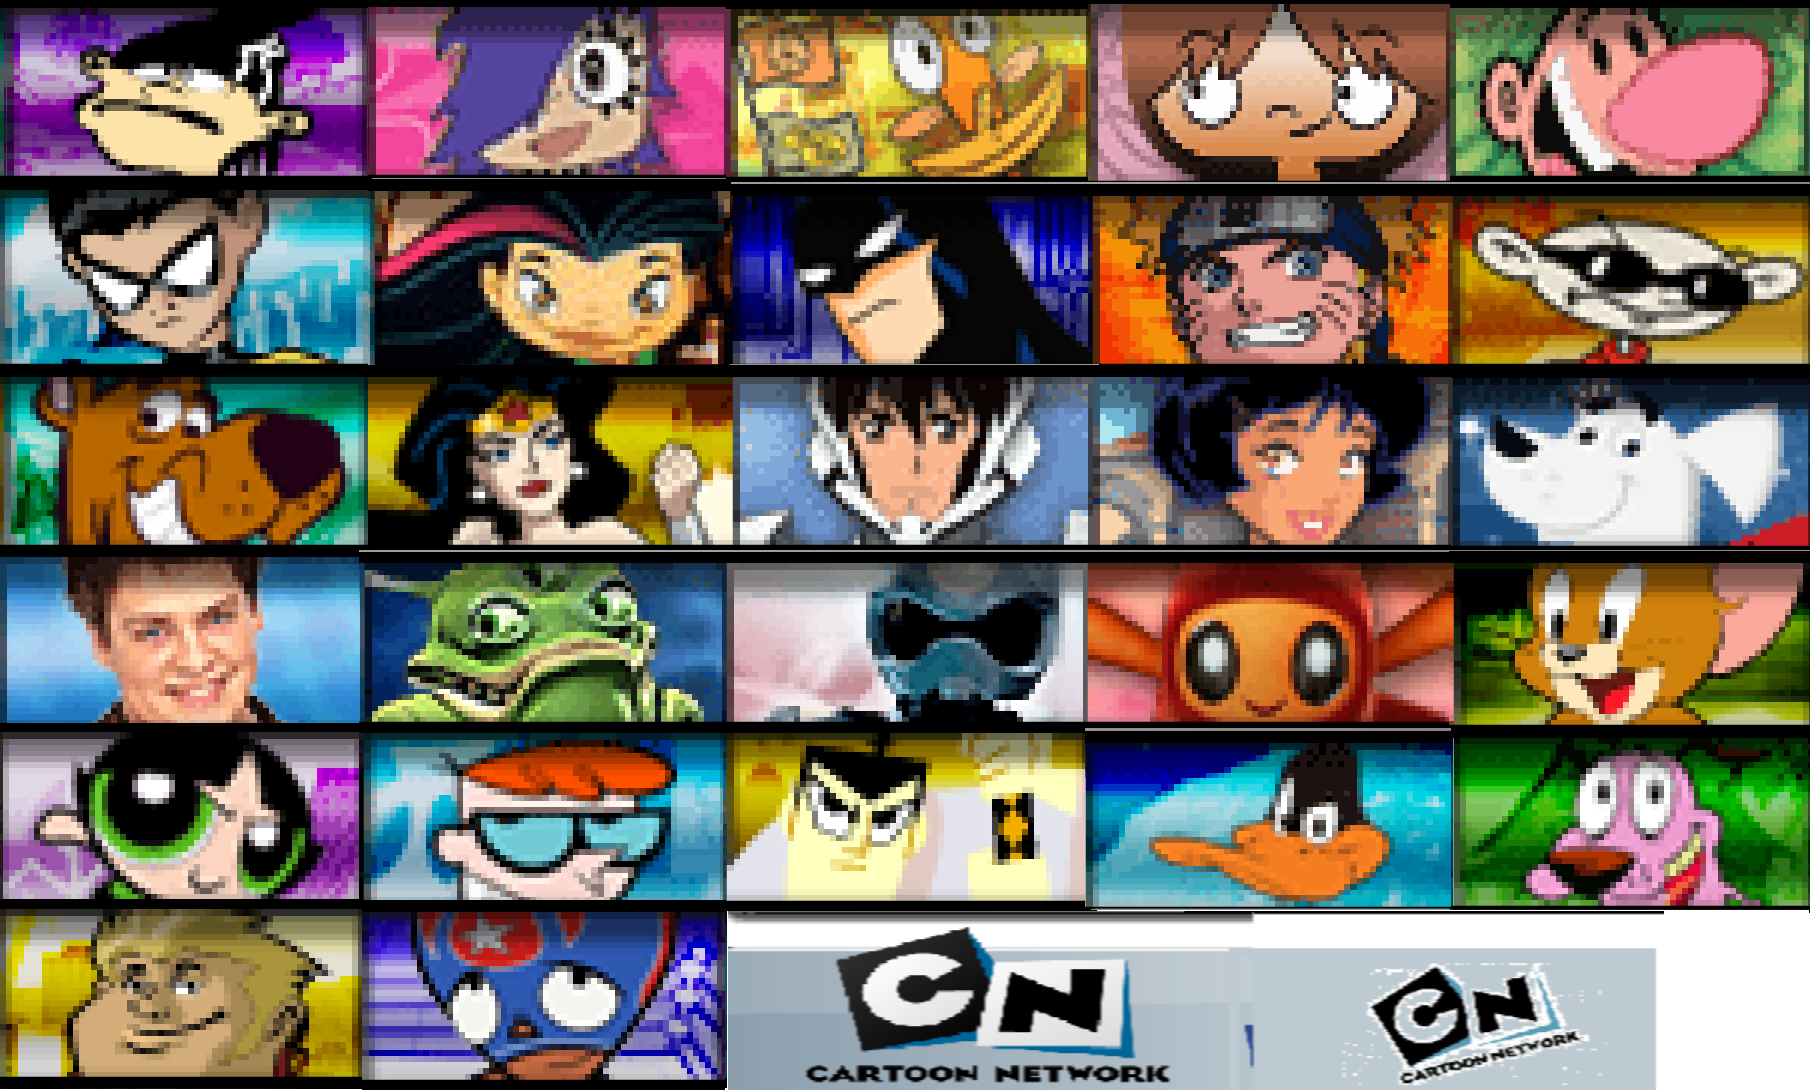  show icons 2005 by KabeyaM on DeviantArt